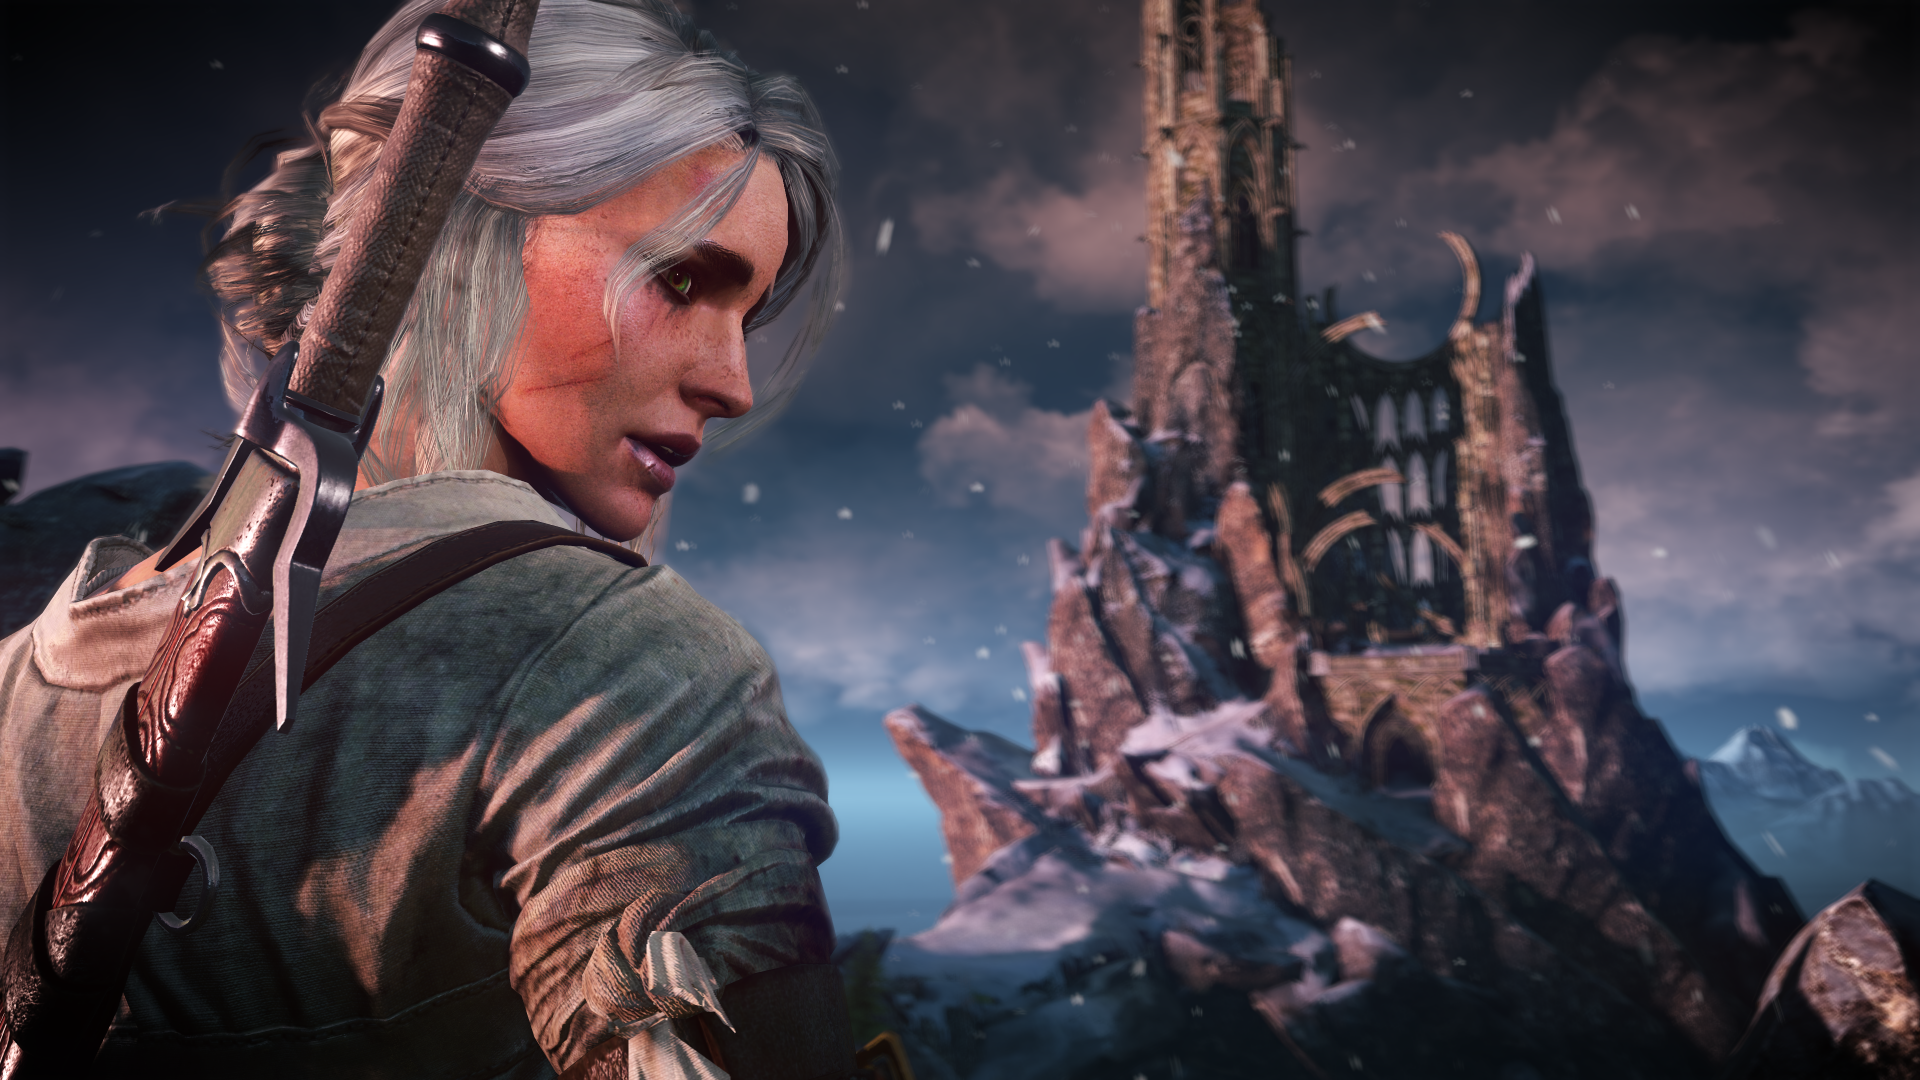 Ciri Will Be Second Playable Character in The Witcher 3: Wild Hunt